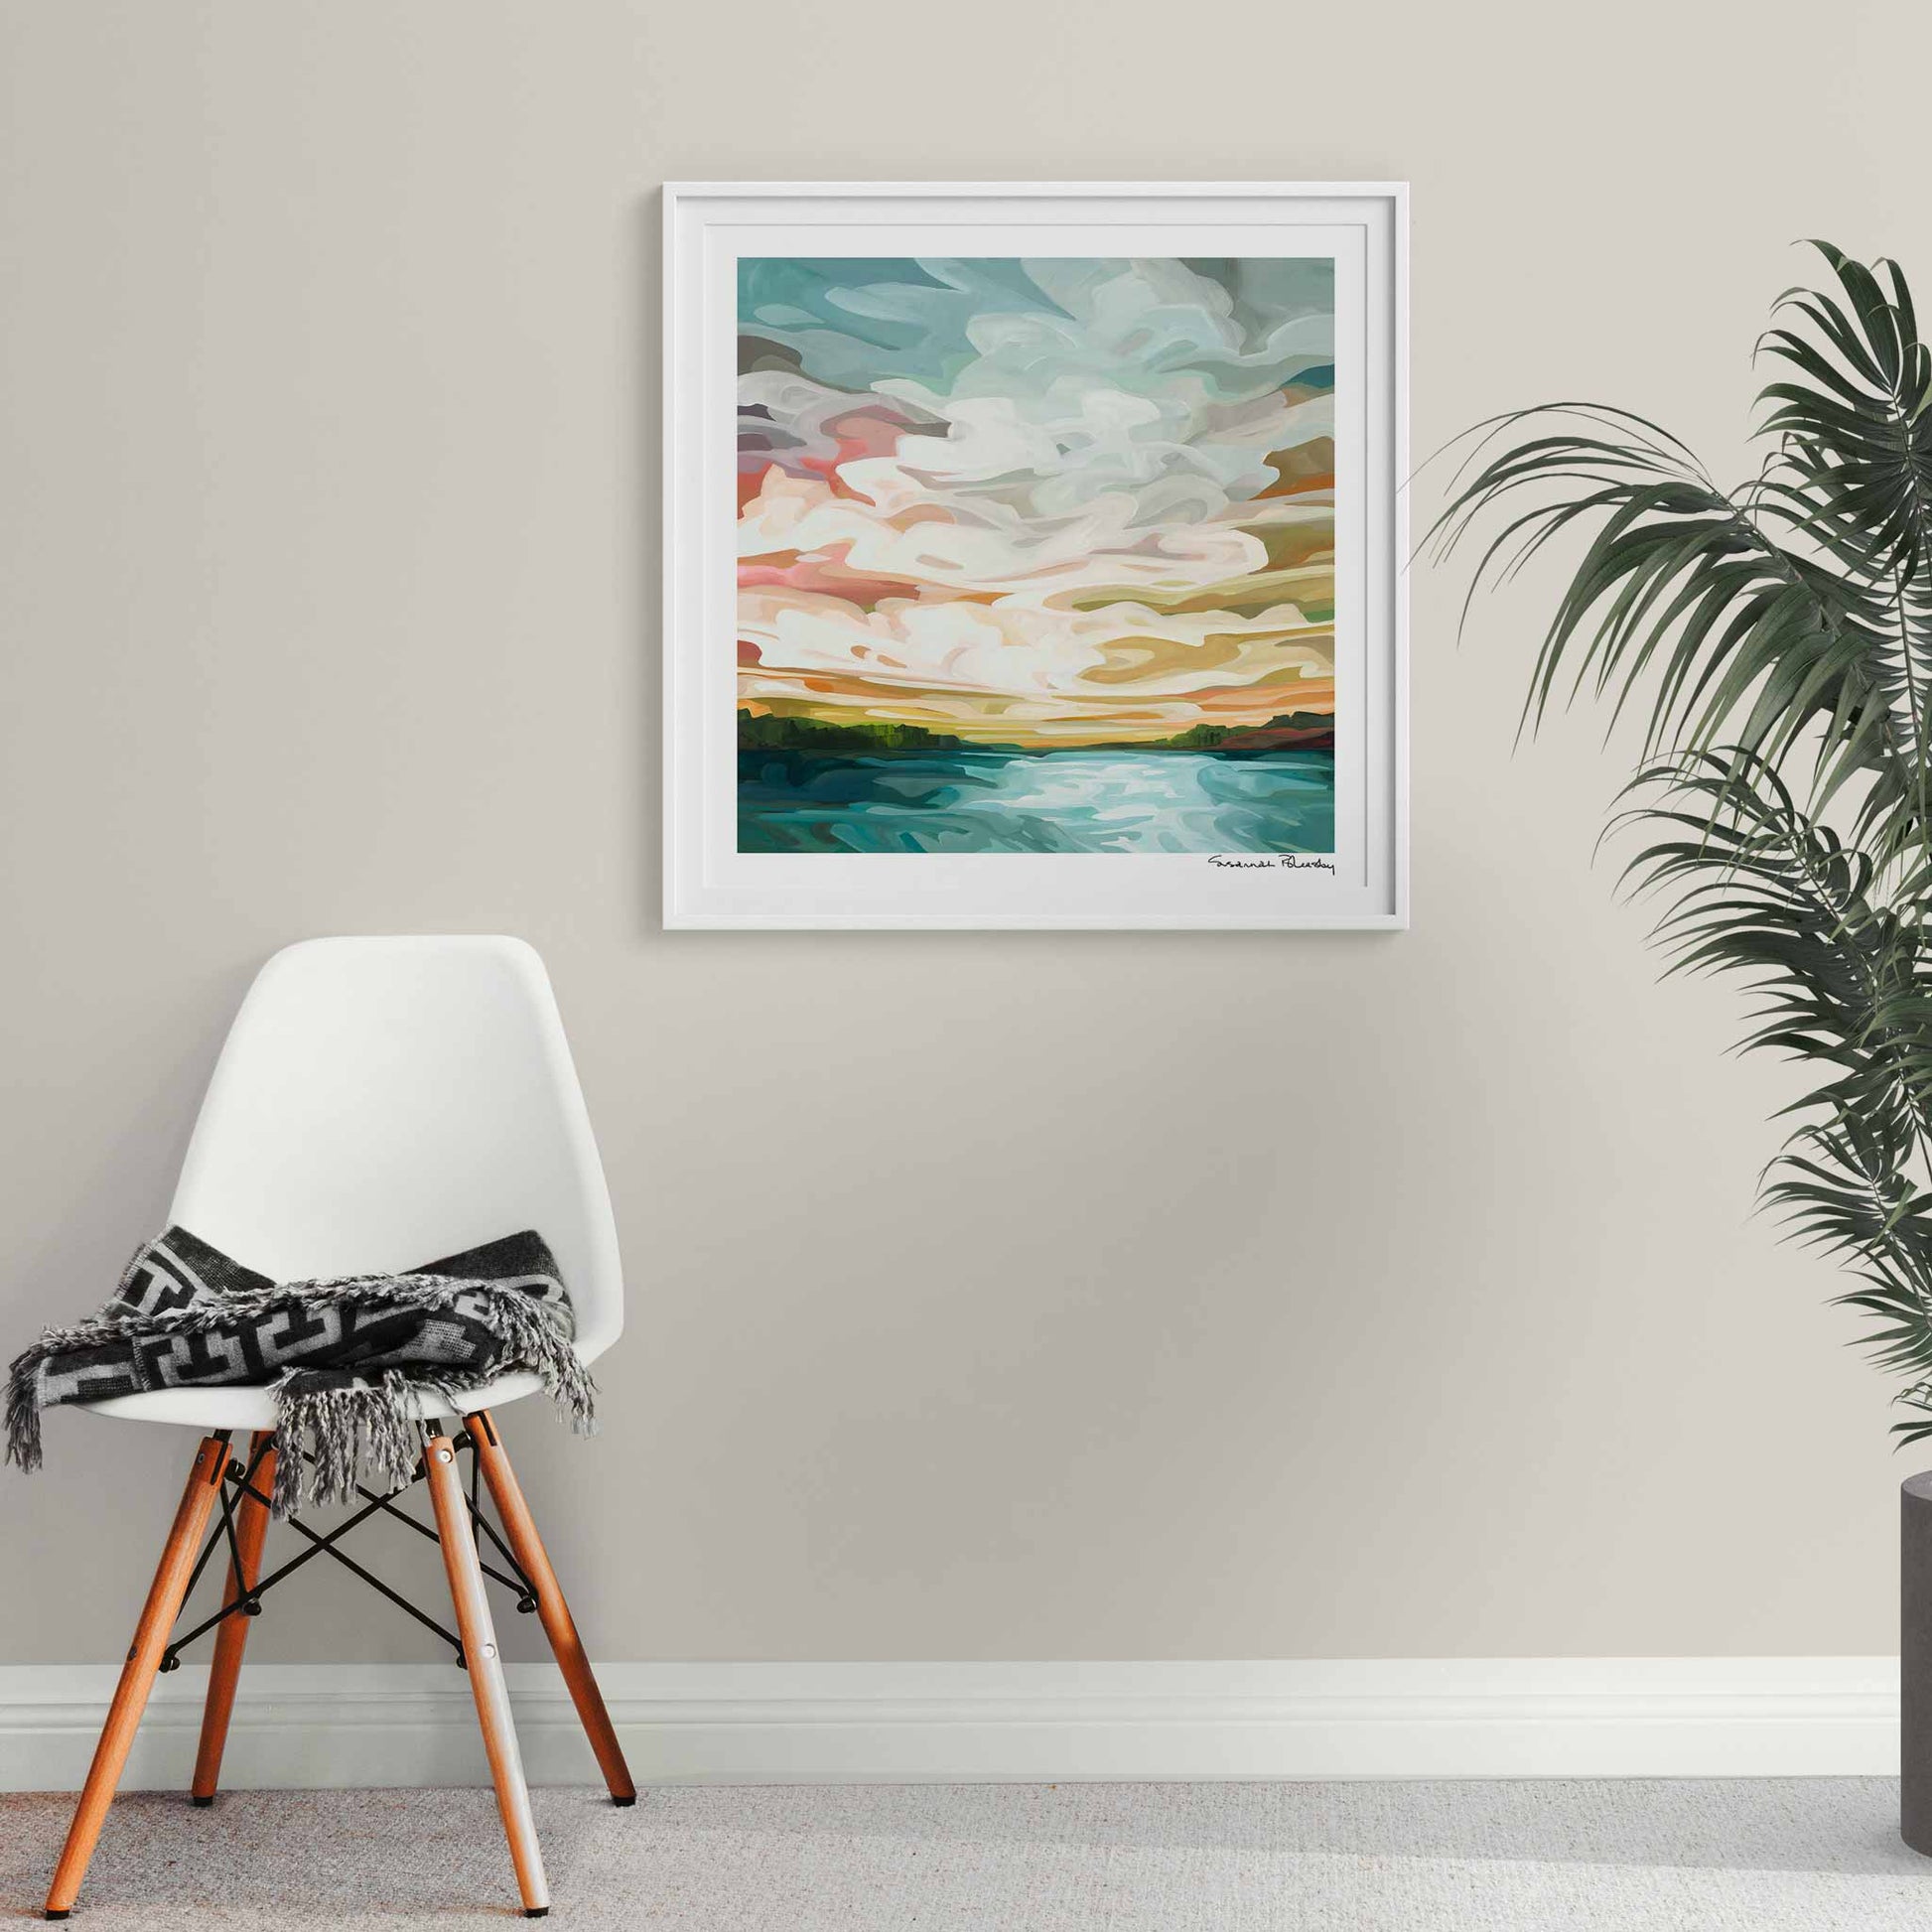 Framed 20x20 fine art print of an abstract sunrise painting by Canadian abstract artist Susannah Bleasby